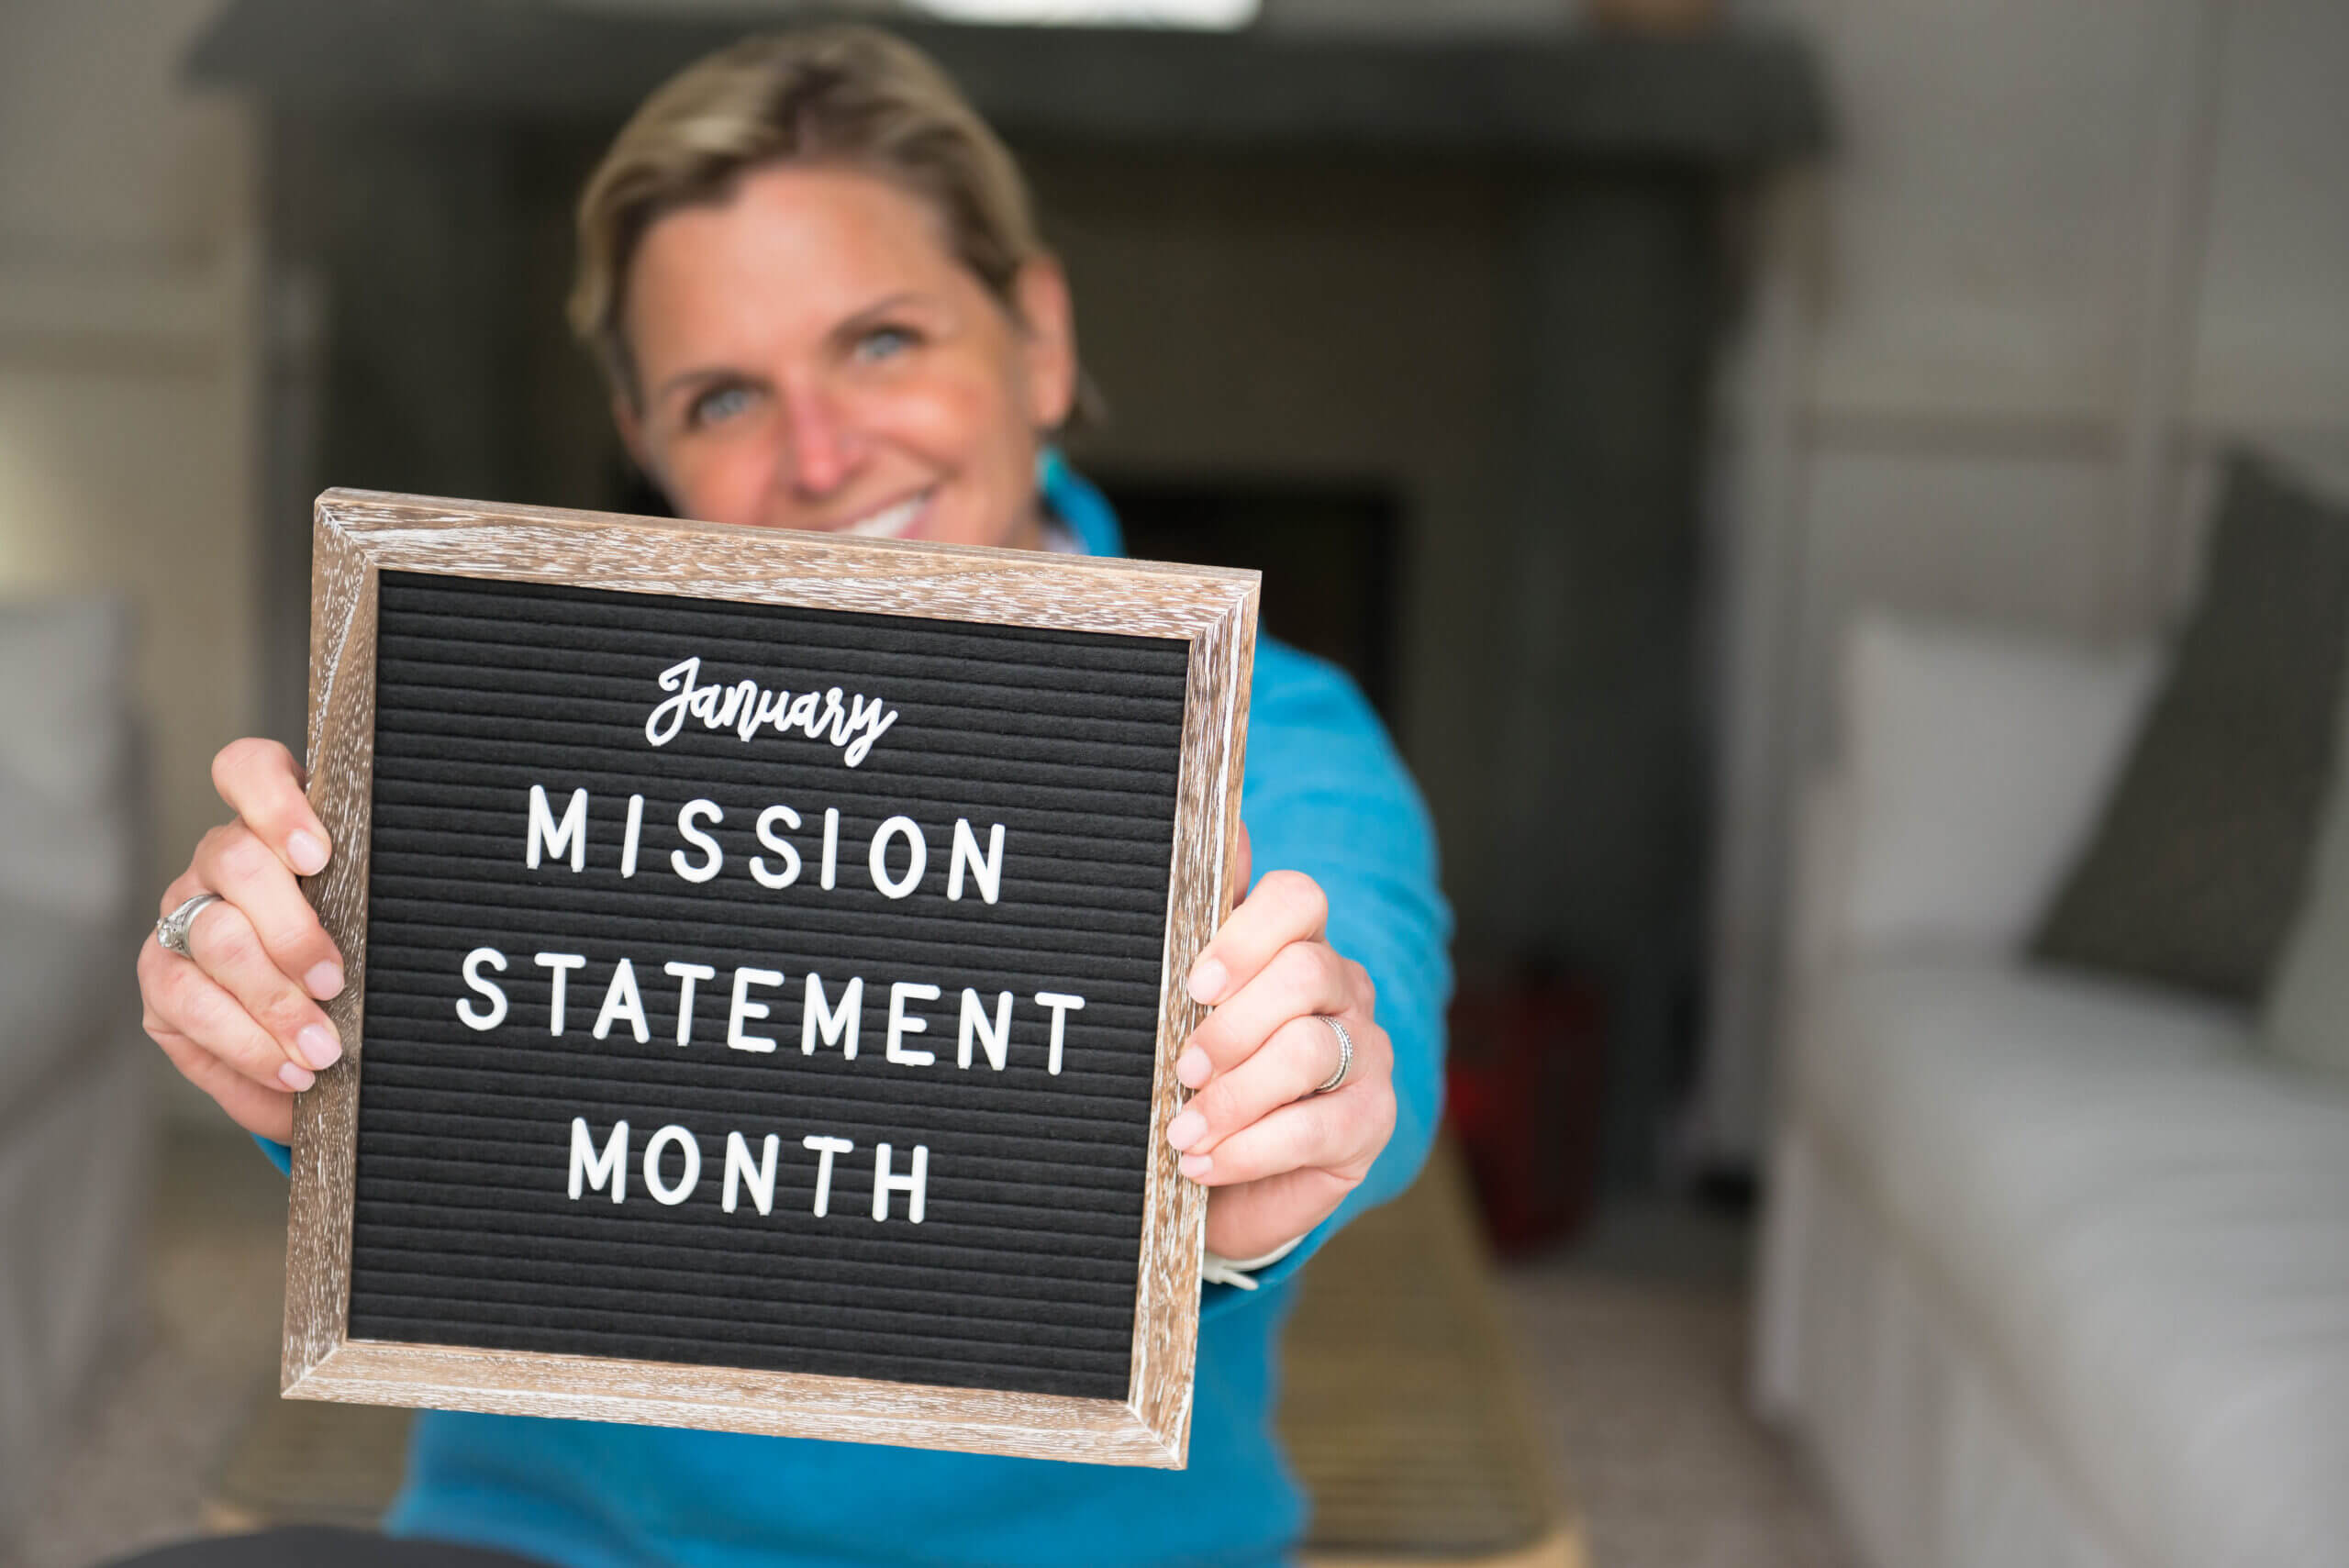 Mags in the background, in the foreground a sign reads "January Mission Statement Month"